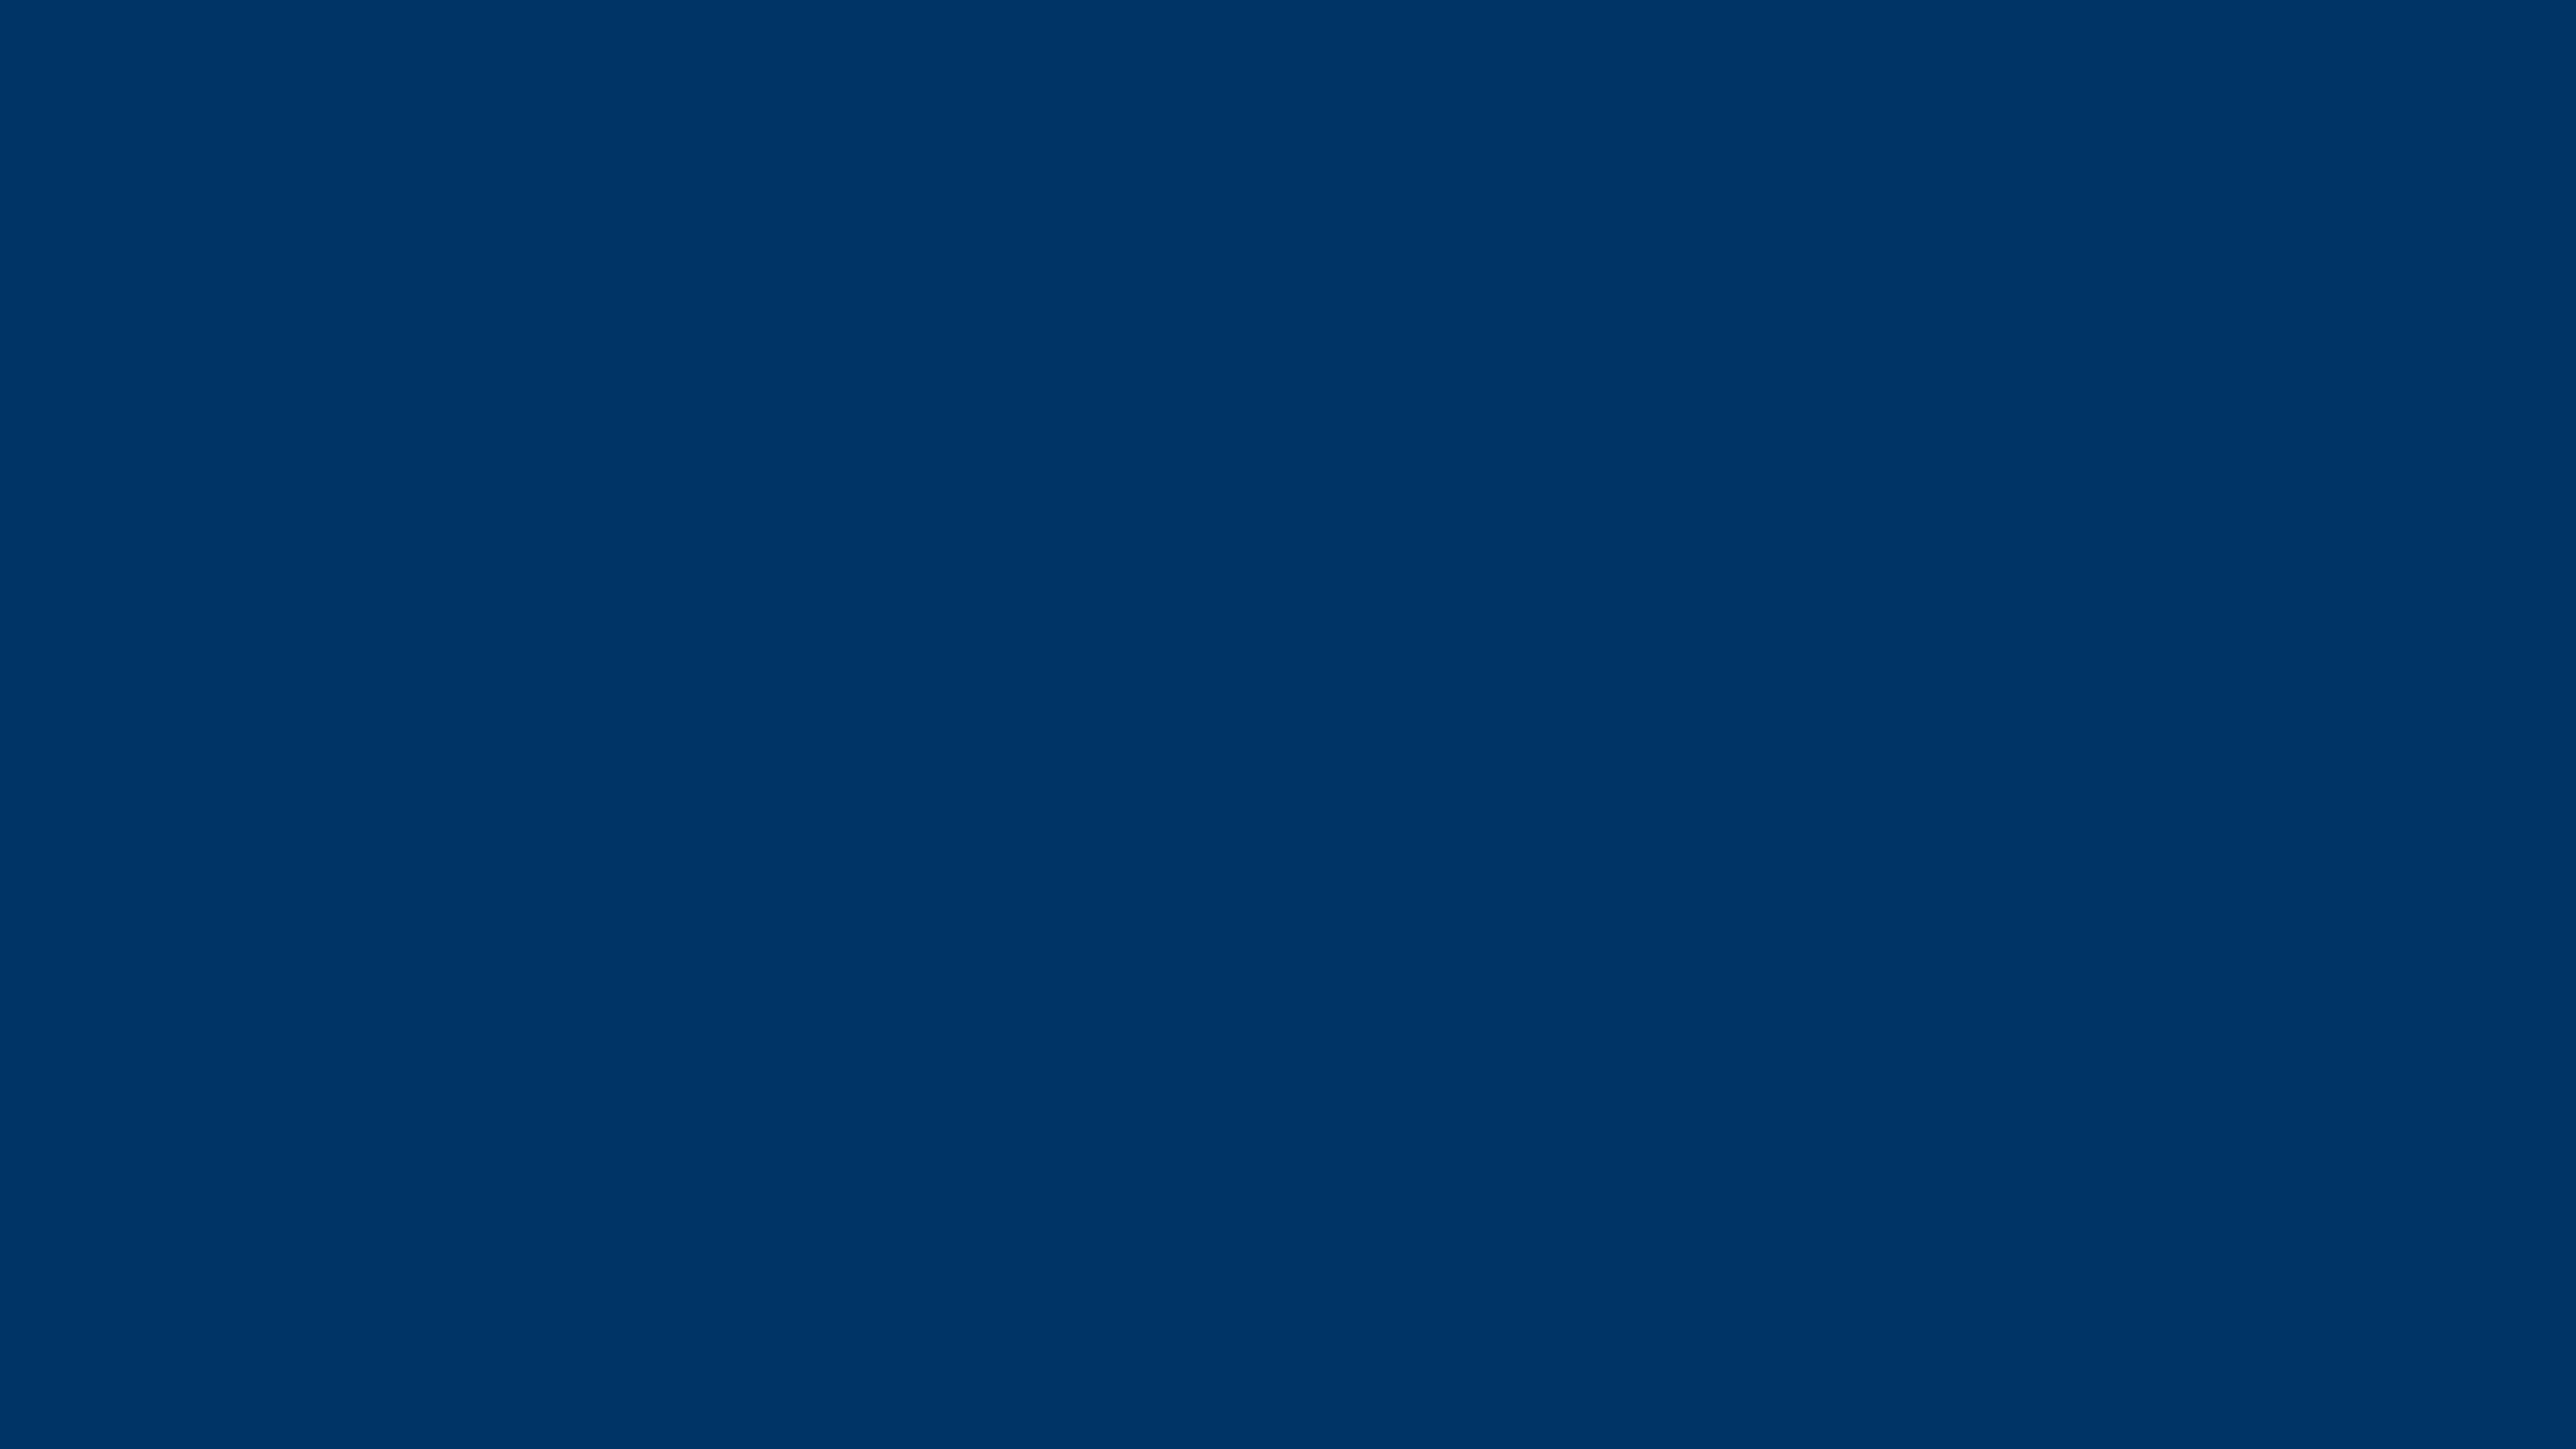 File:5120x2880-dark-blue-solid-color-background.jpg - Wikimedia Commons